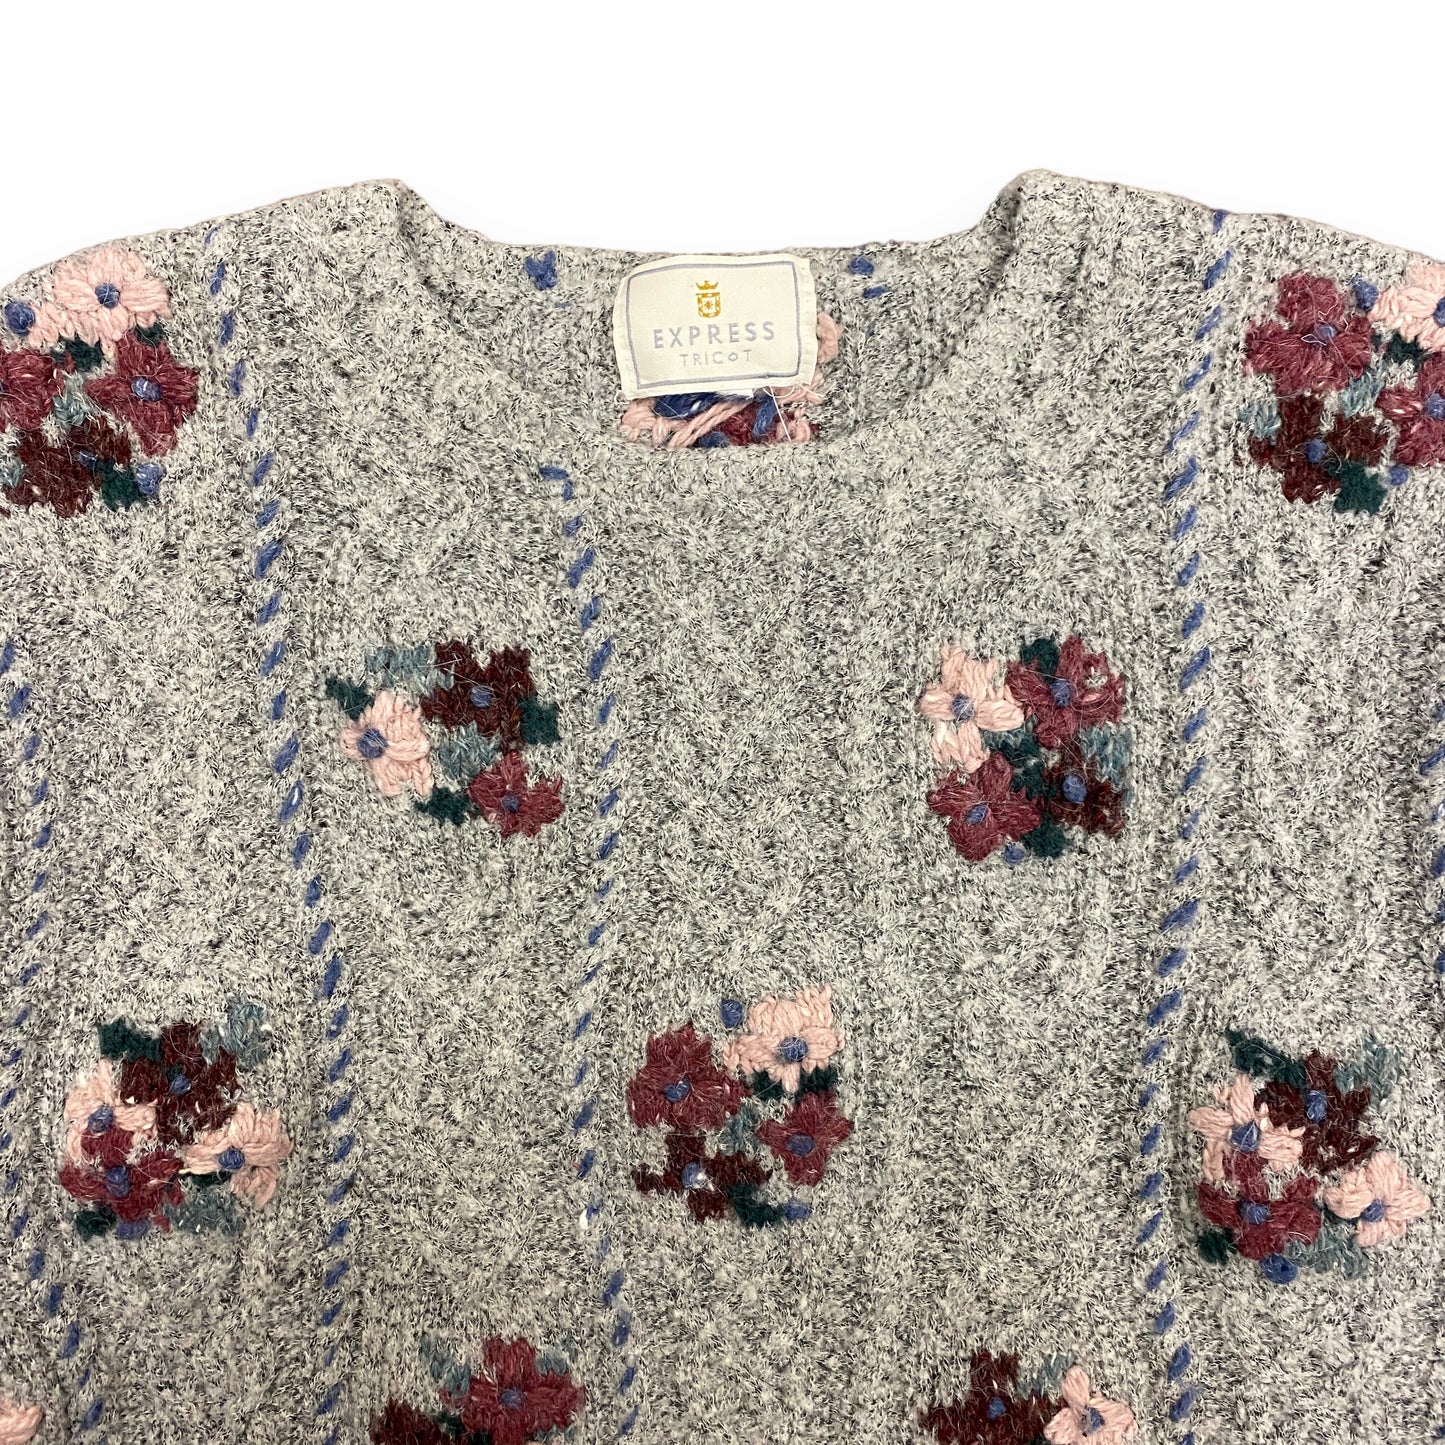 Vintage Express Tricot Wool Floral Sweater - Size Medium